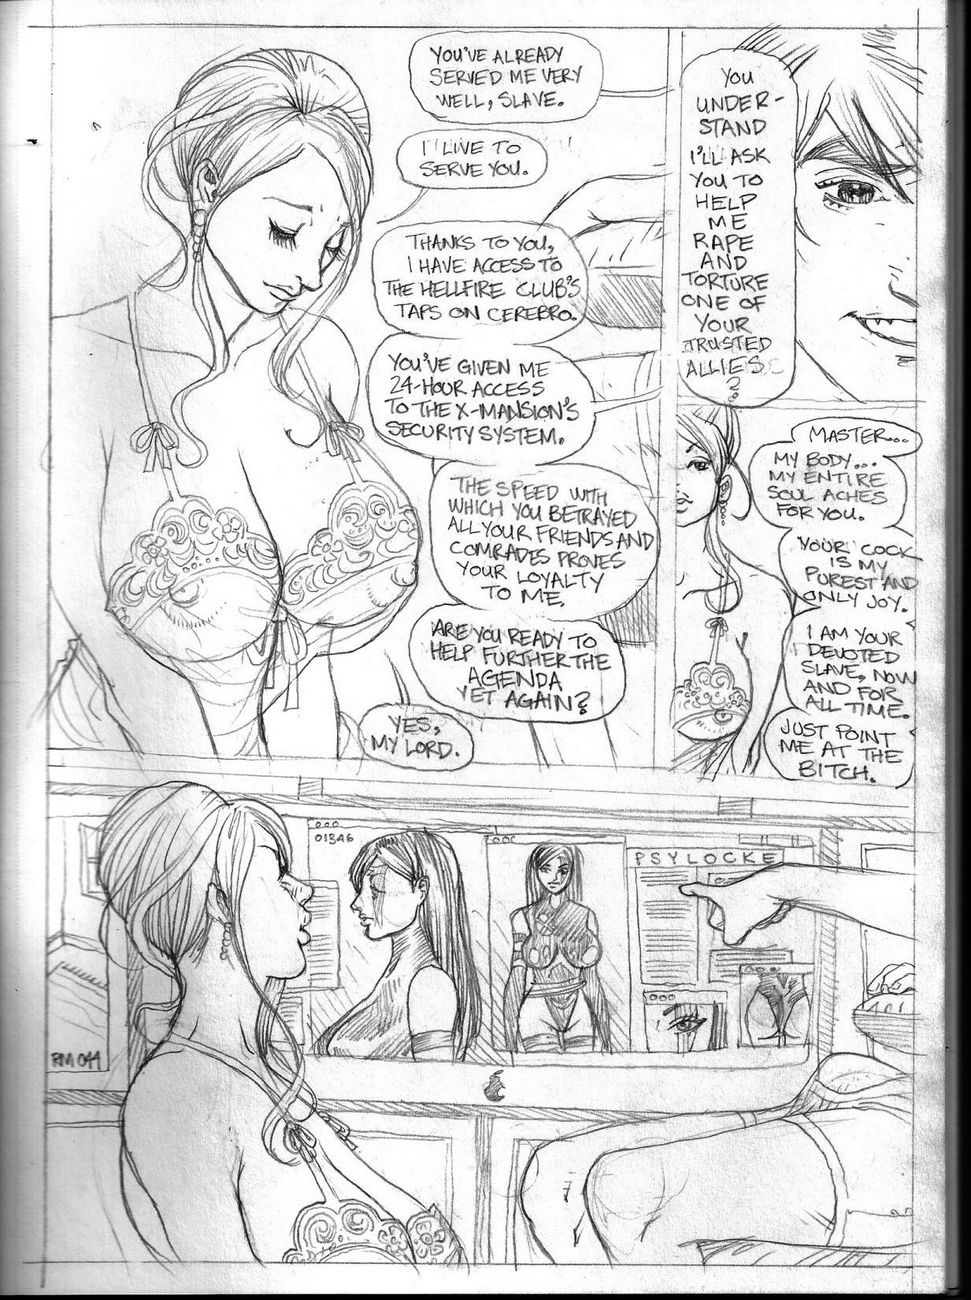 Submission Agenda 2 - Psylocke page 3